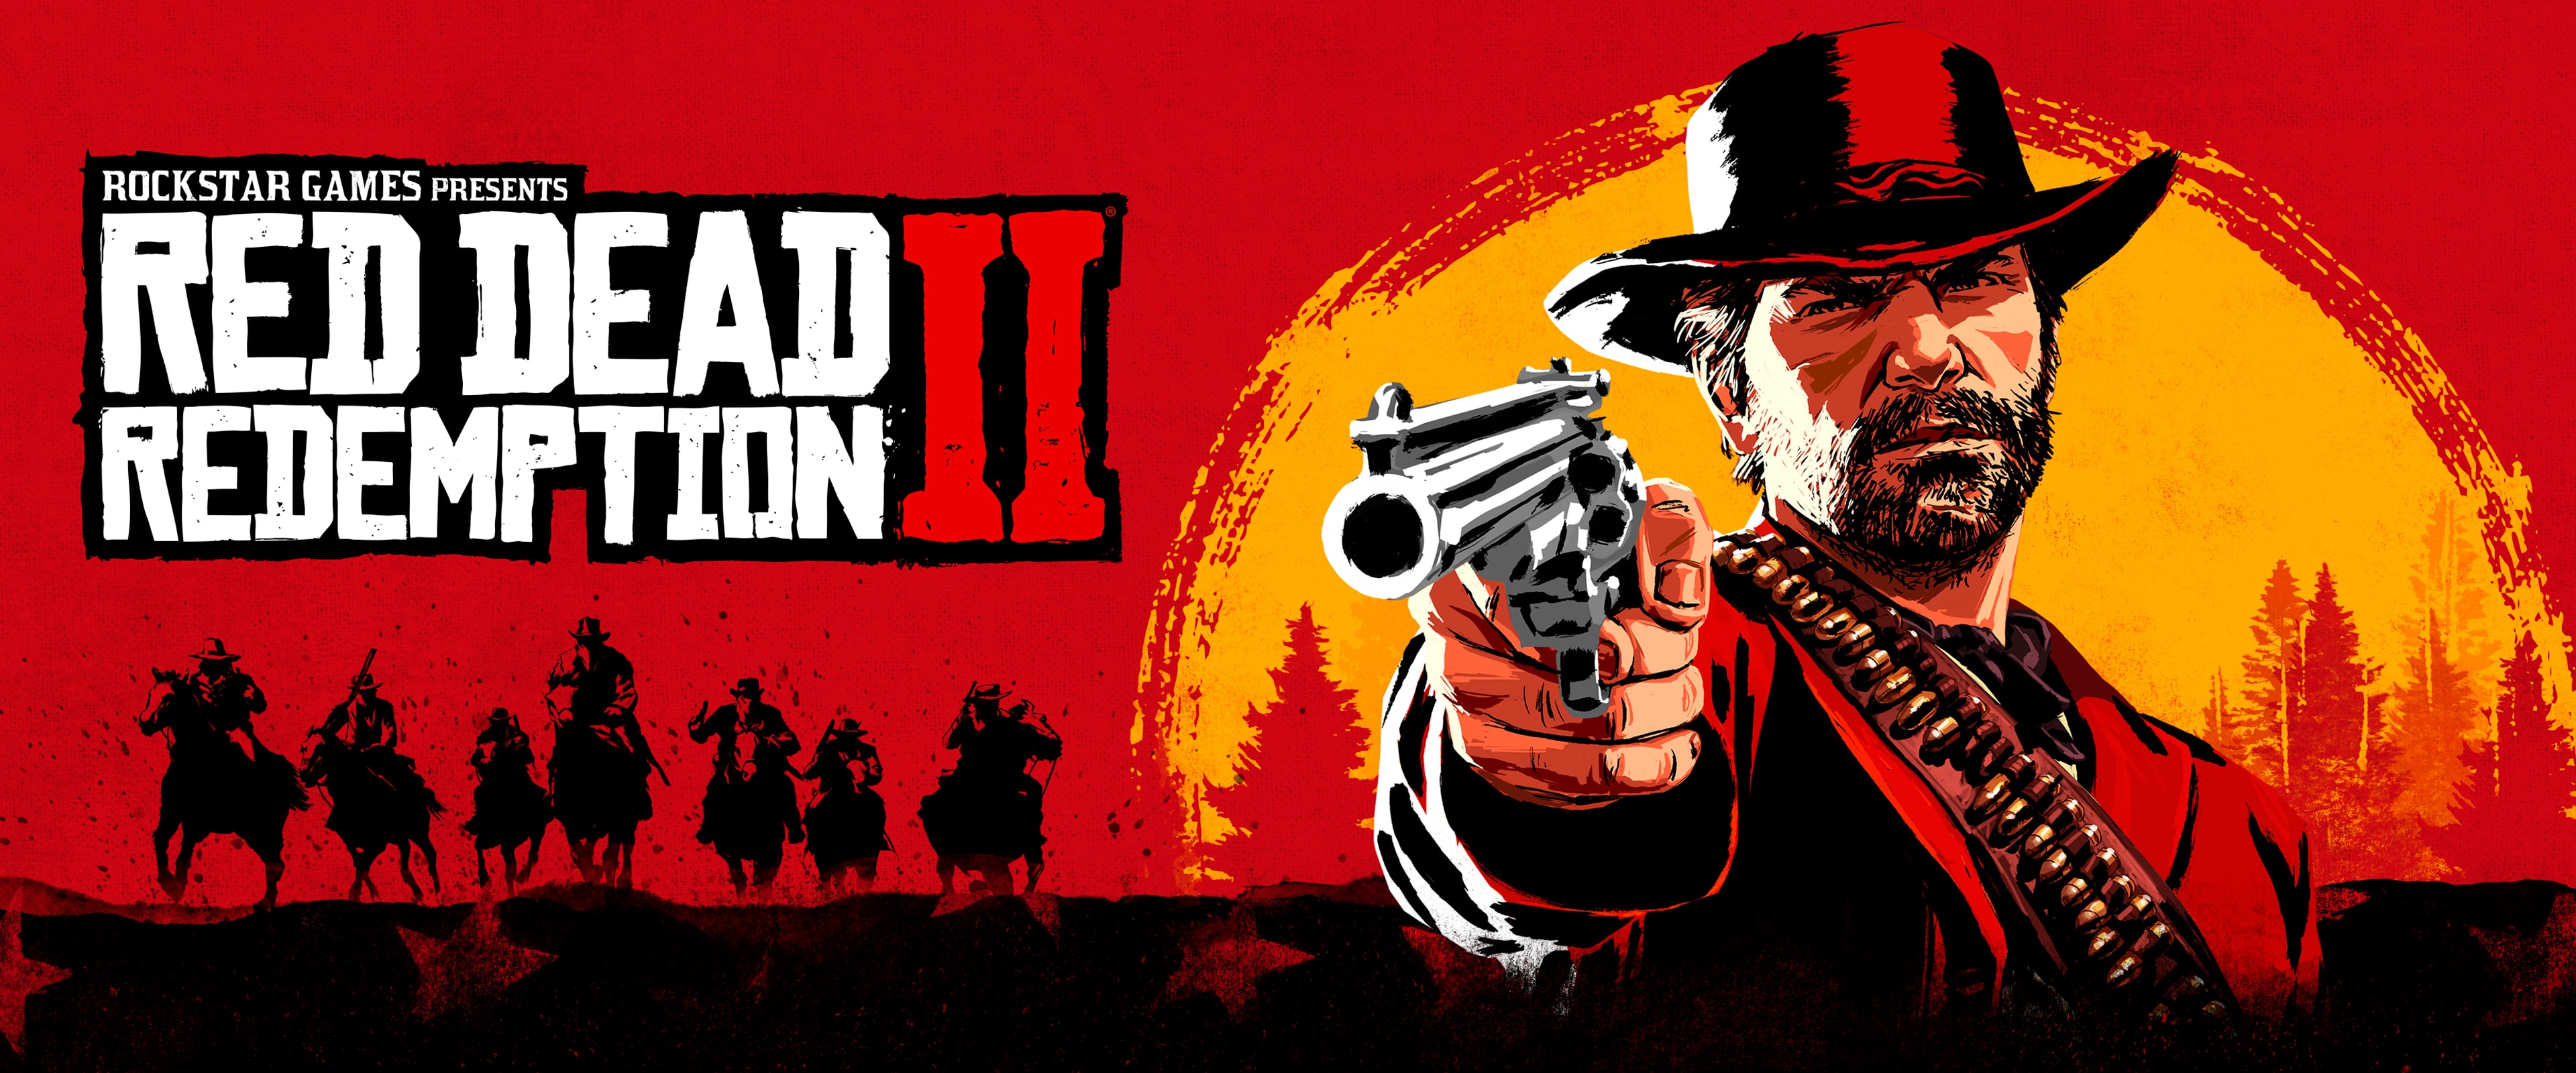 main banner of Red Dead Redemption 2 for PC showing the logo and a cowboy with a revolver in his hand